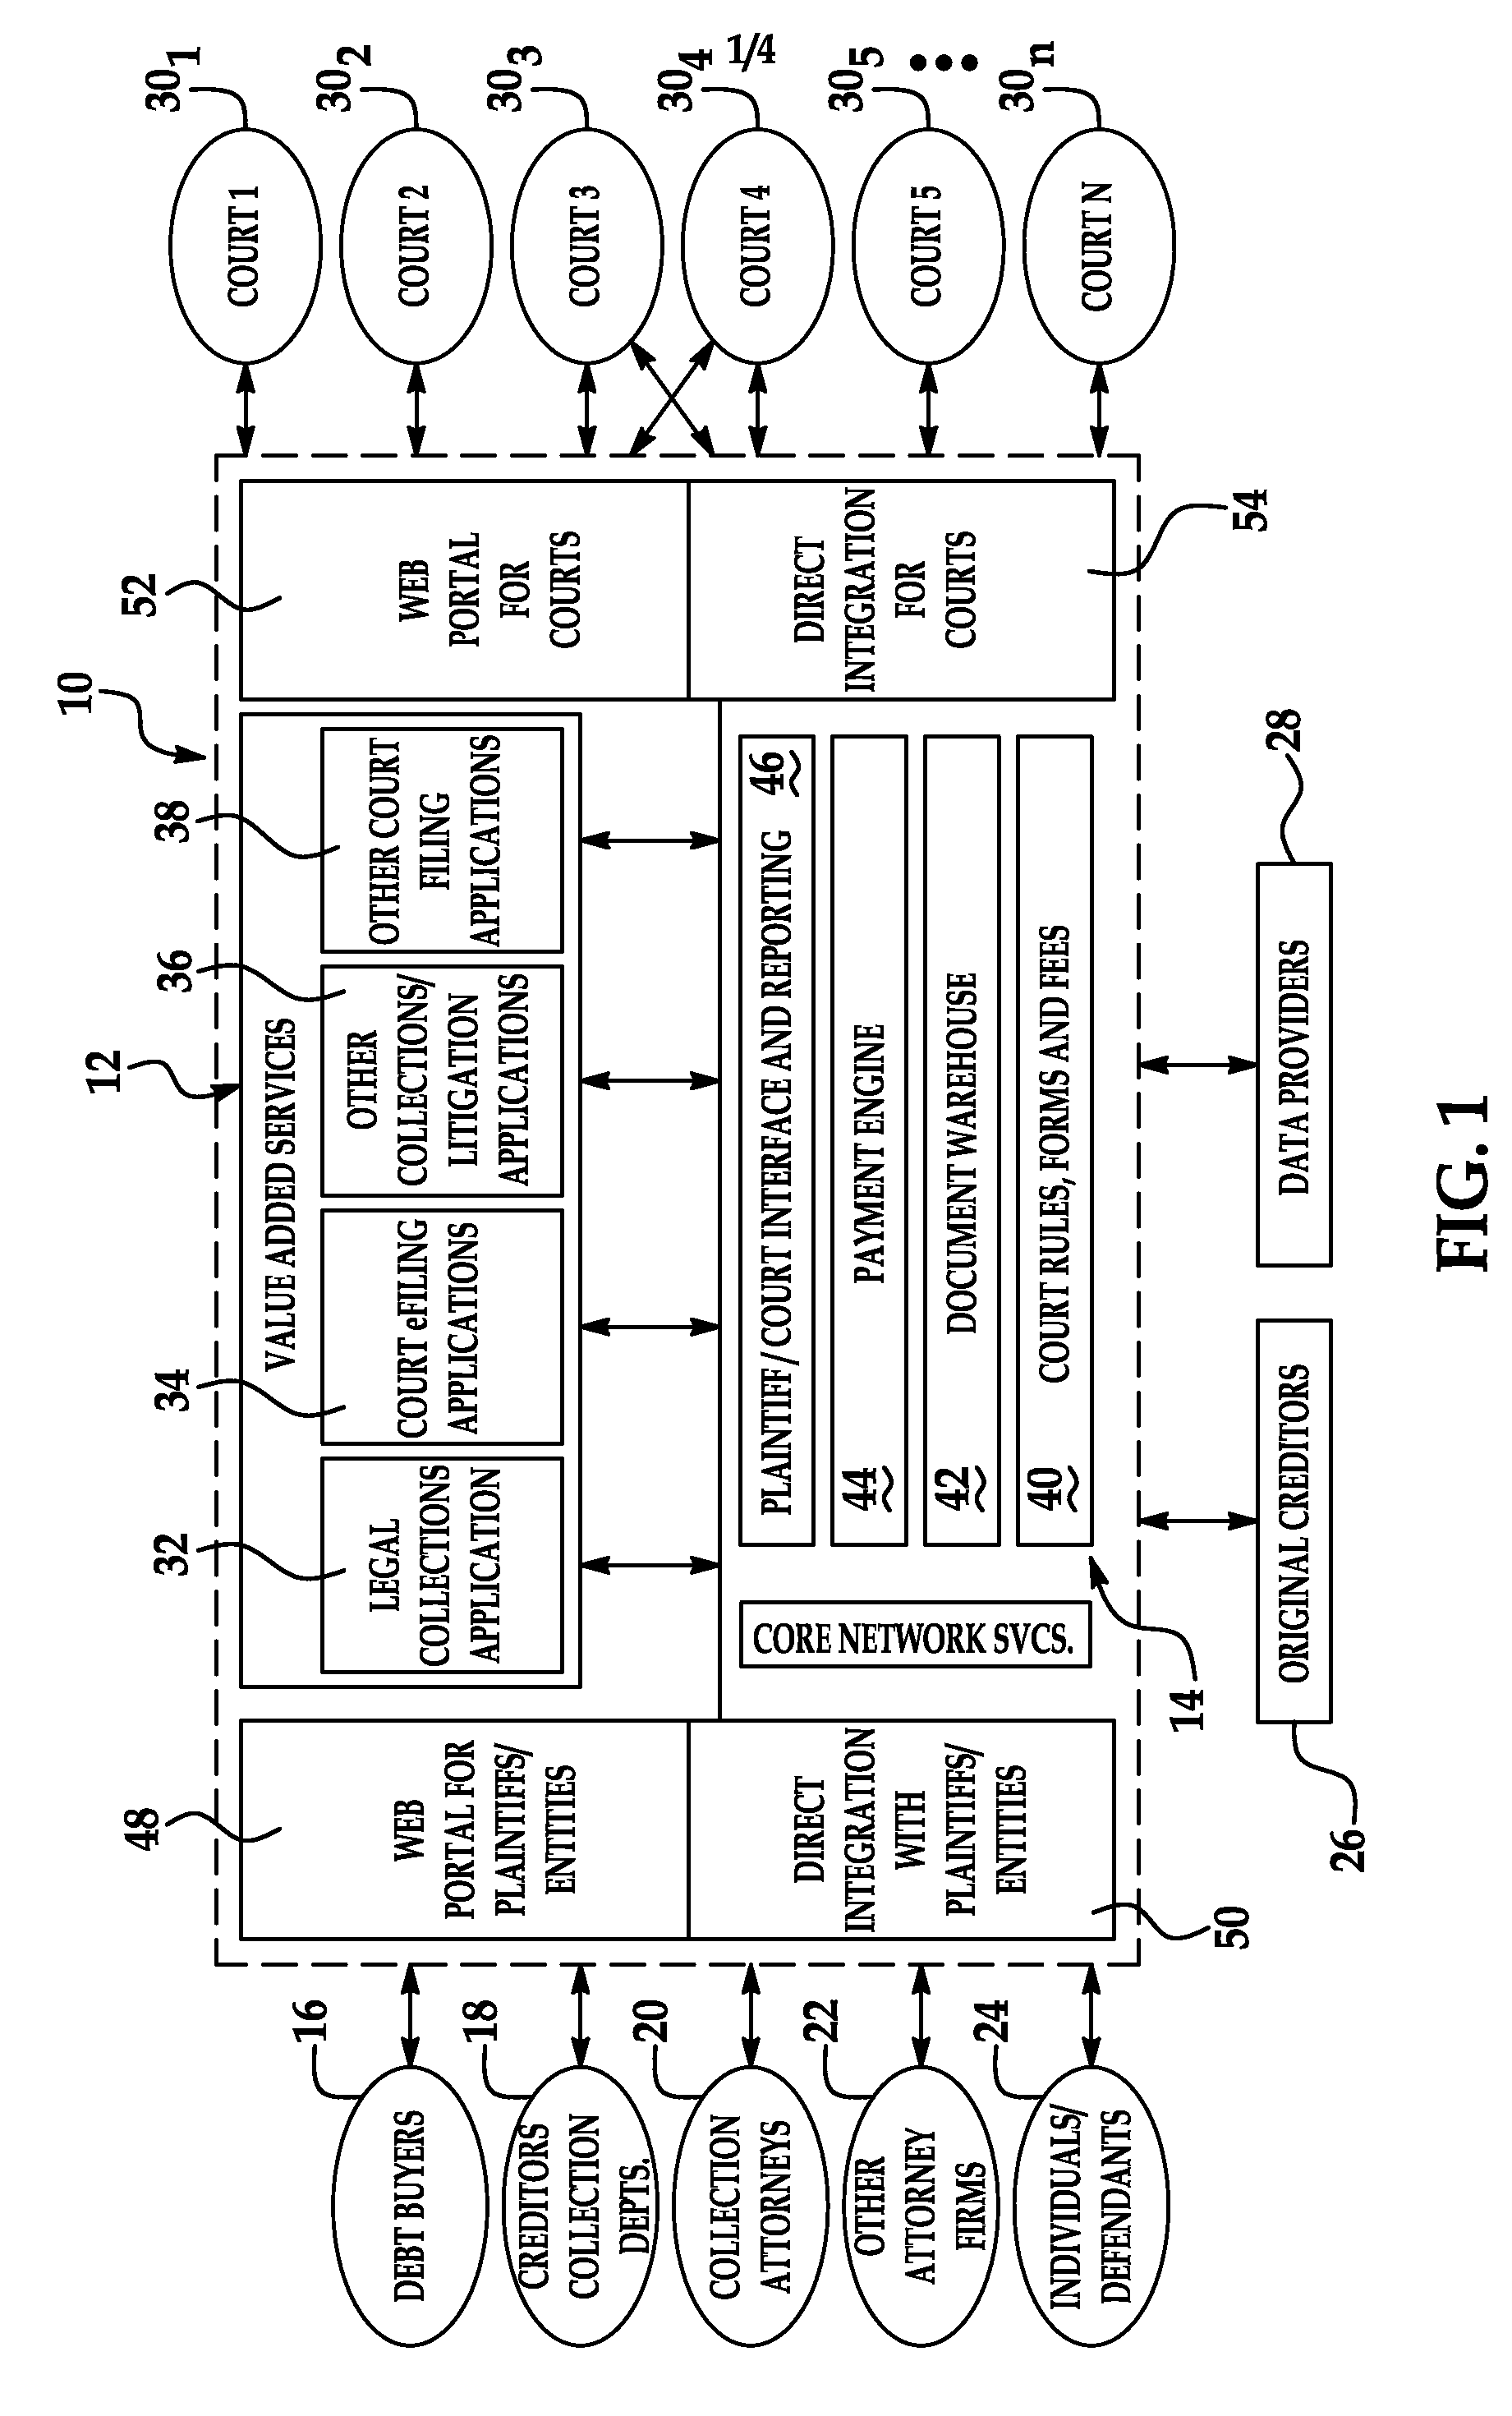 System and method for legal document authoring and electronic court filing